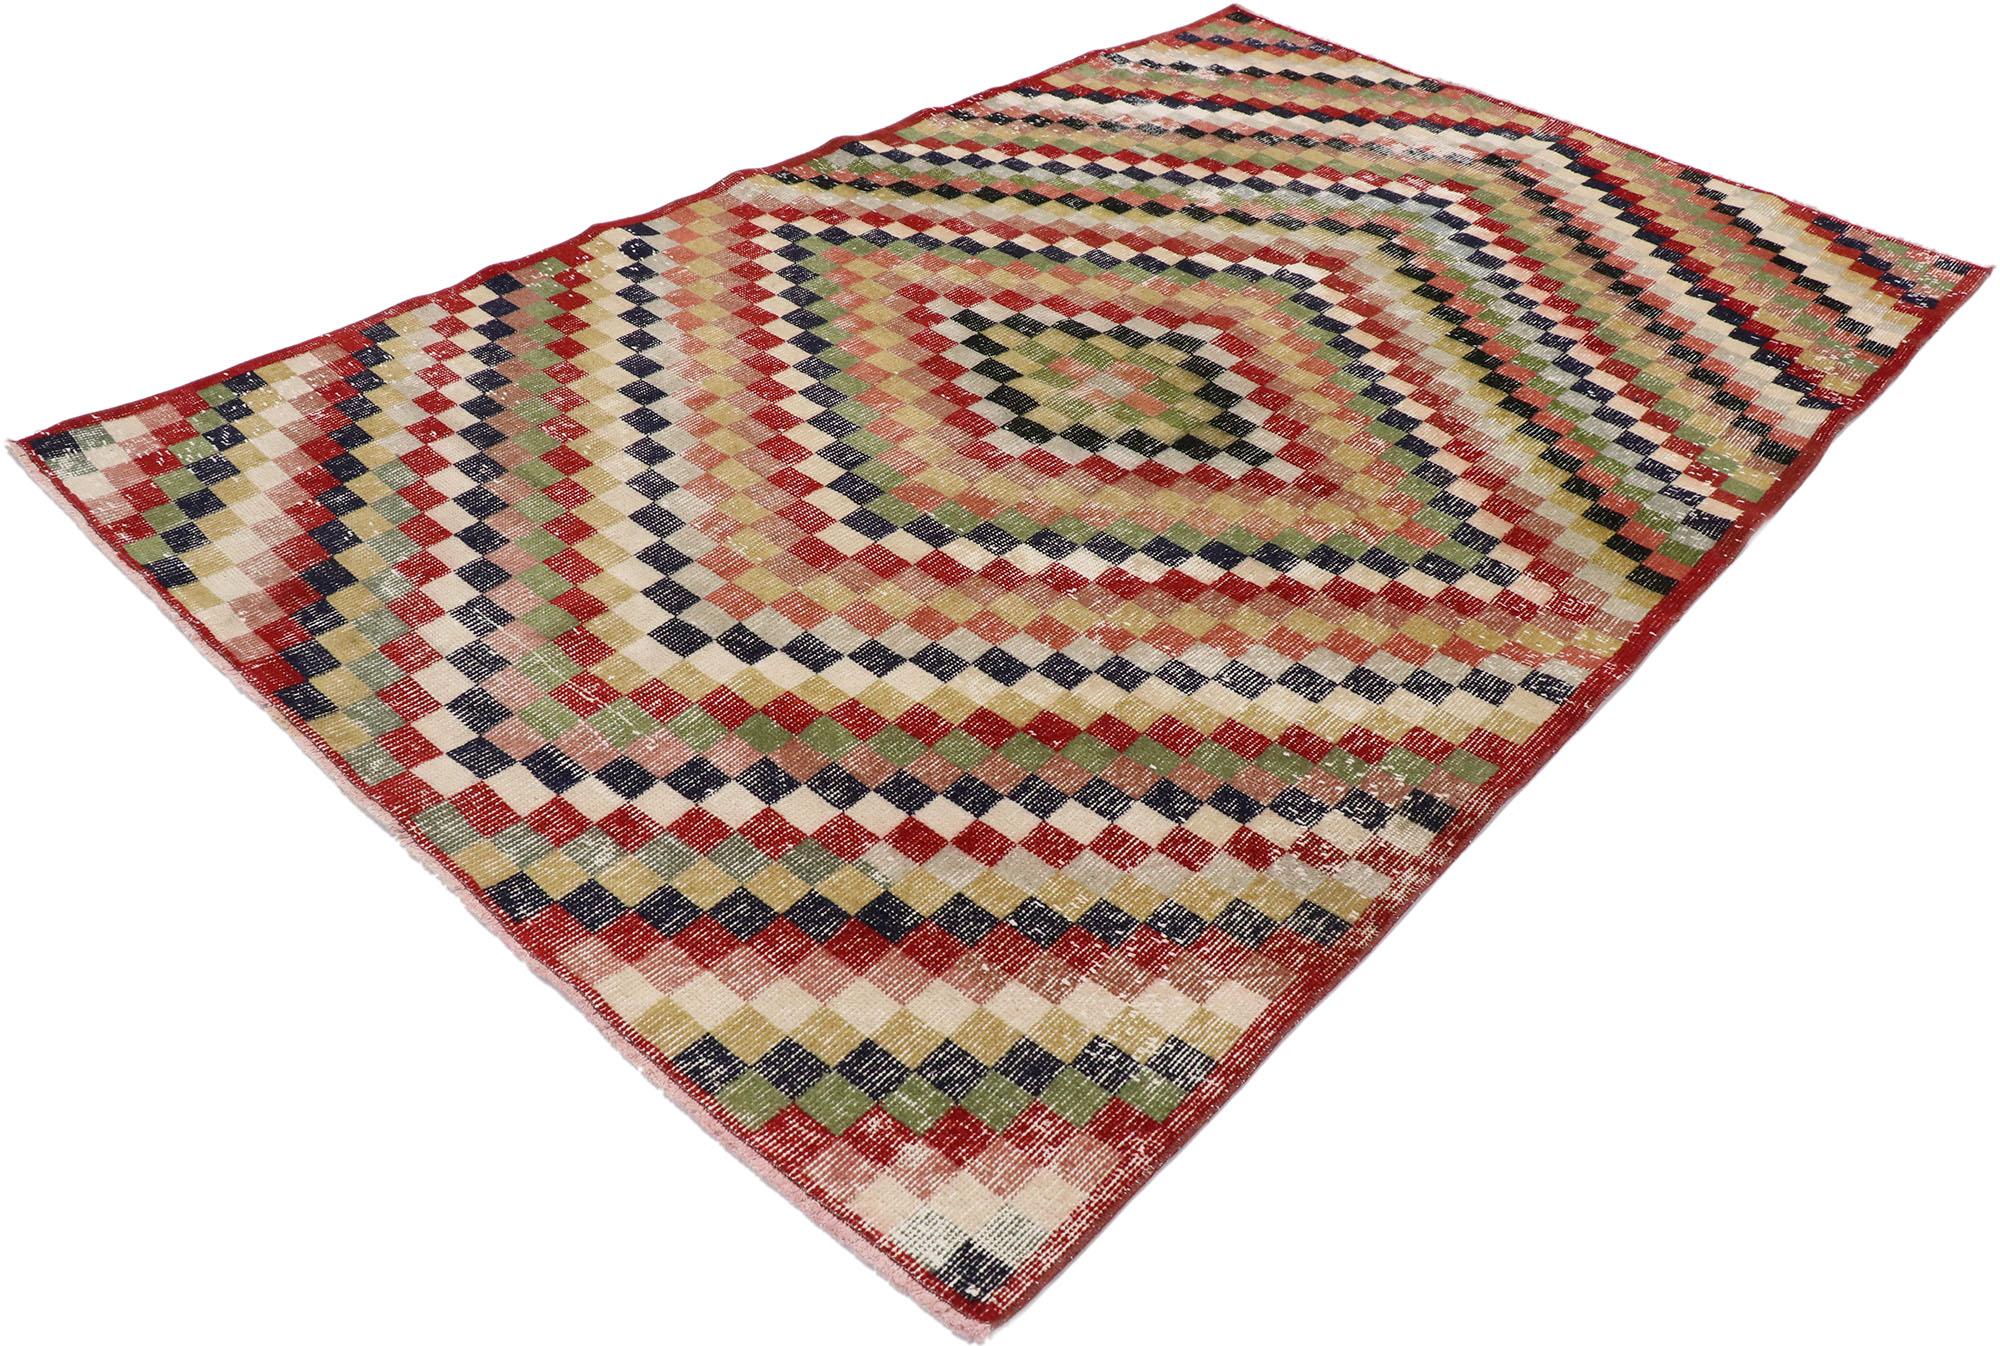 53323, distressed vintage Turkish Sivas rug with rustic Mid-Century Modern Cubist style. This hand knotted wool distressed vintage Turkish Sivas rug features an all-over checkered diamond pattern comprised of rows of multicolored cubes. Each row of